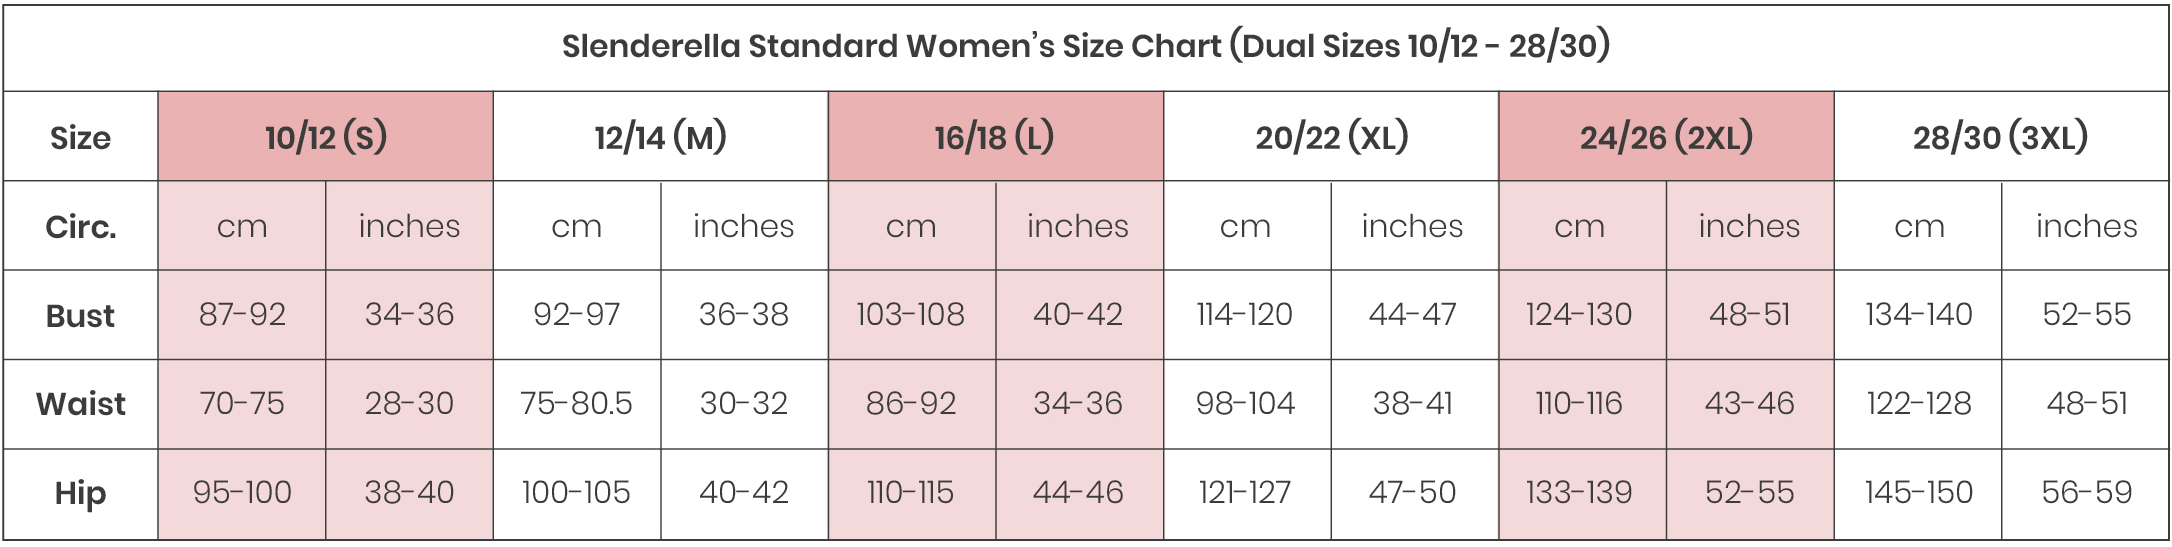 bra cup size chart for men